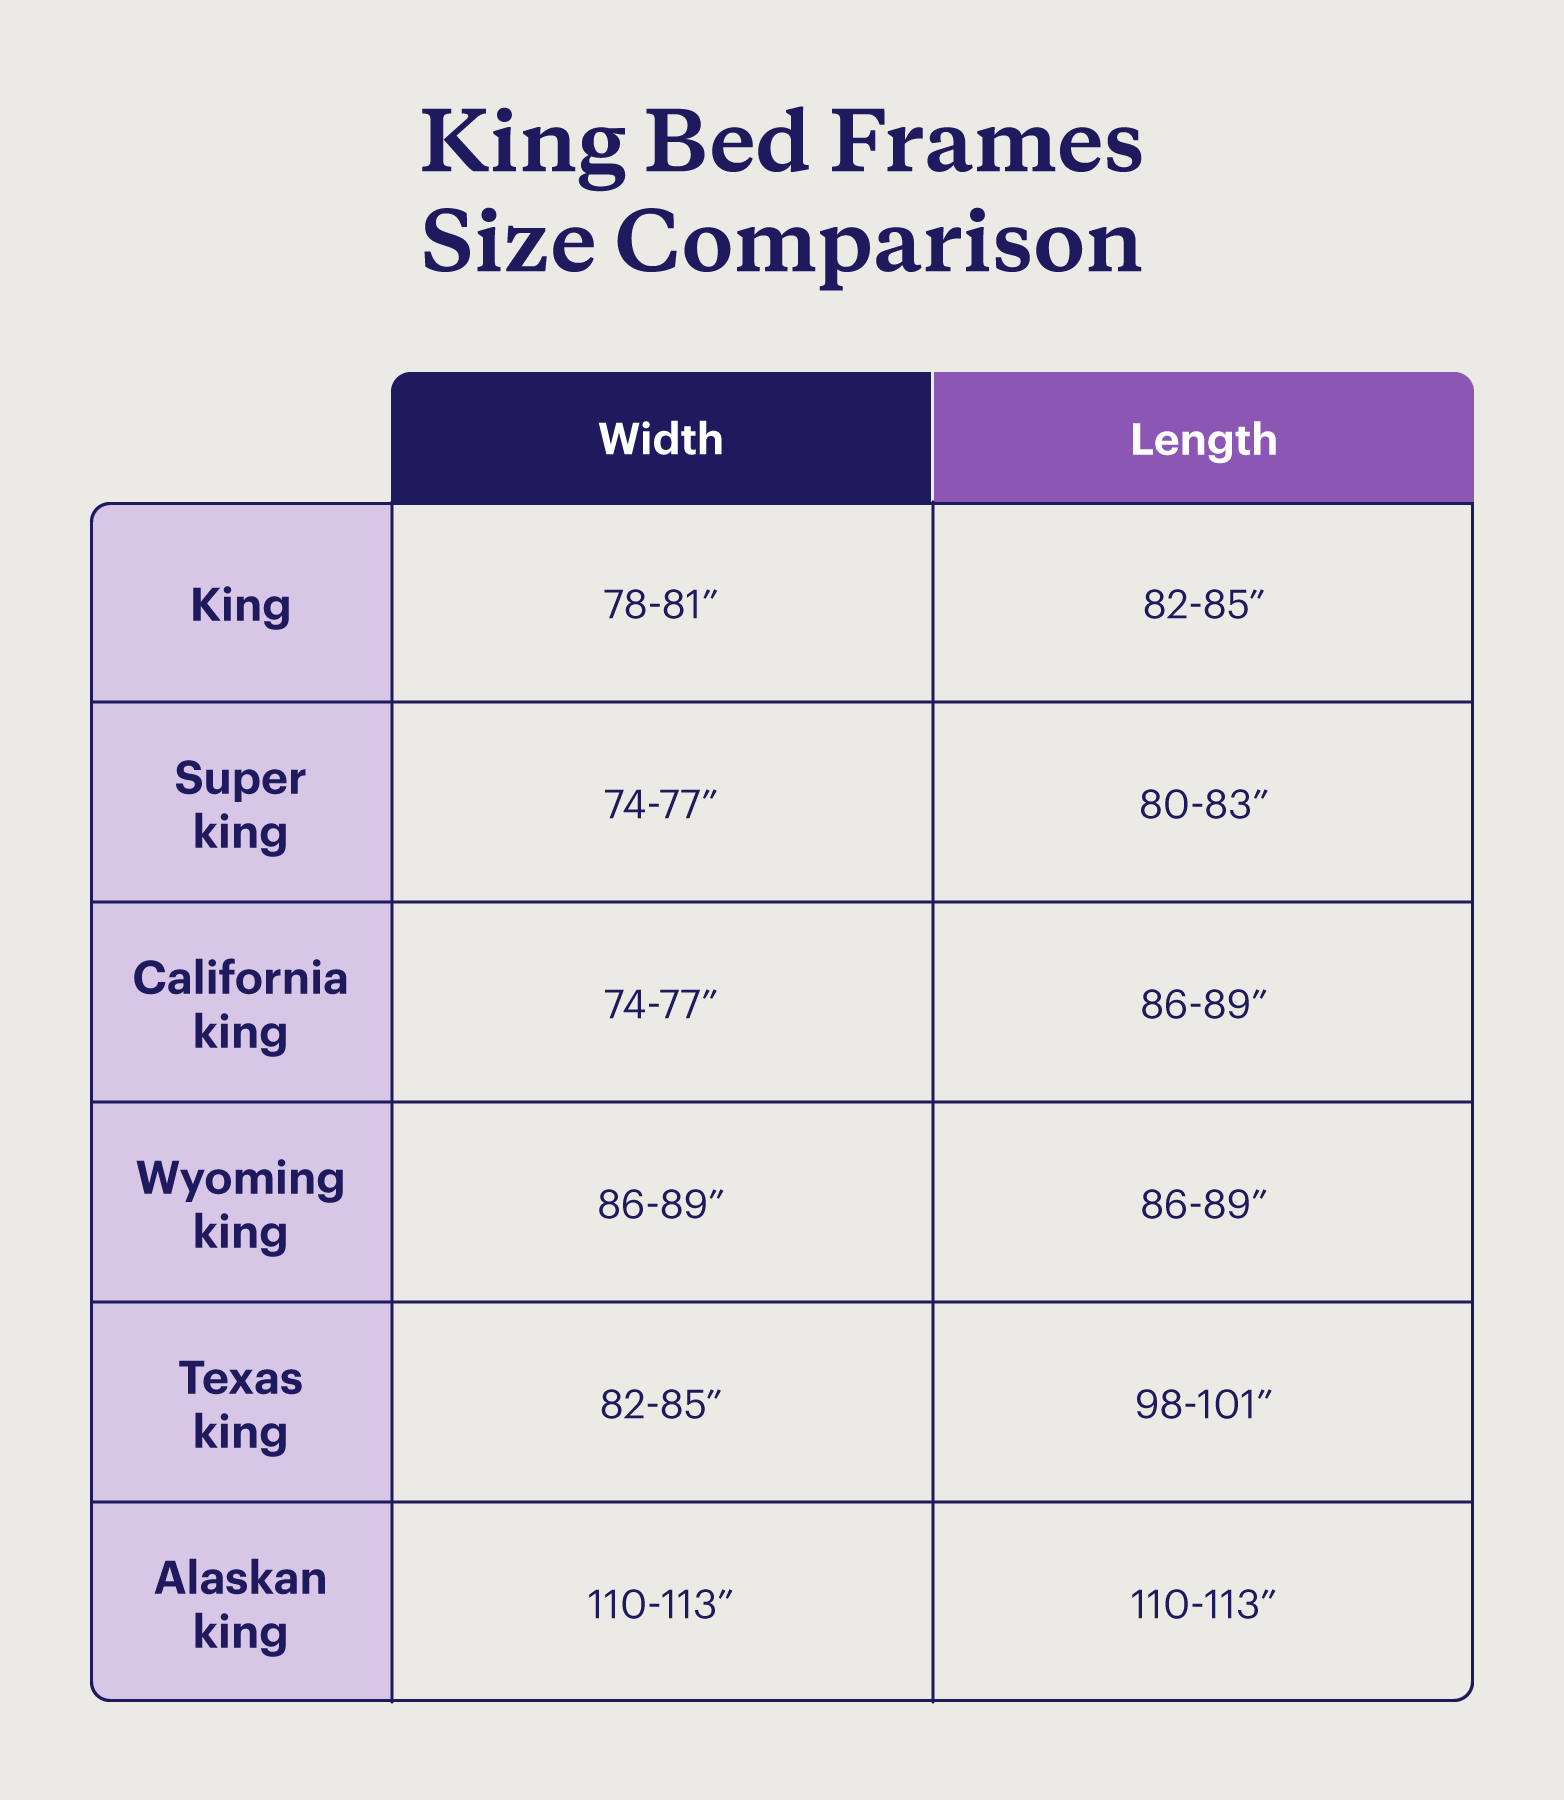 A king bed frame dimensions comparison chart covering the most well-known king sizes.